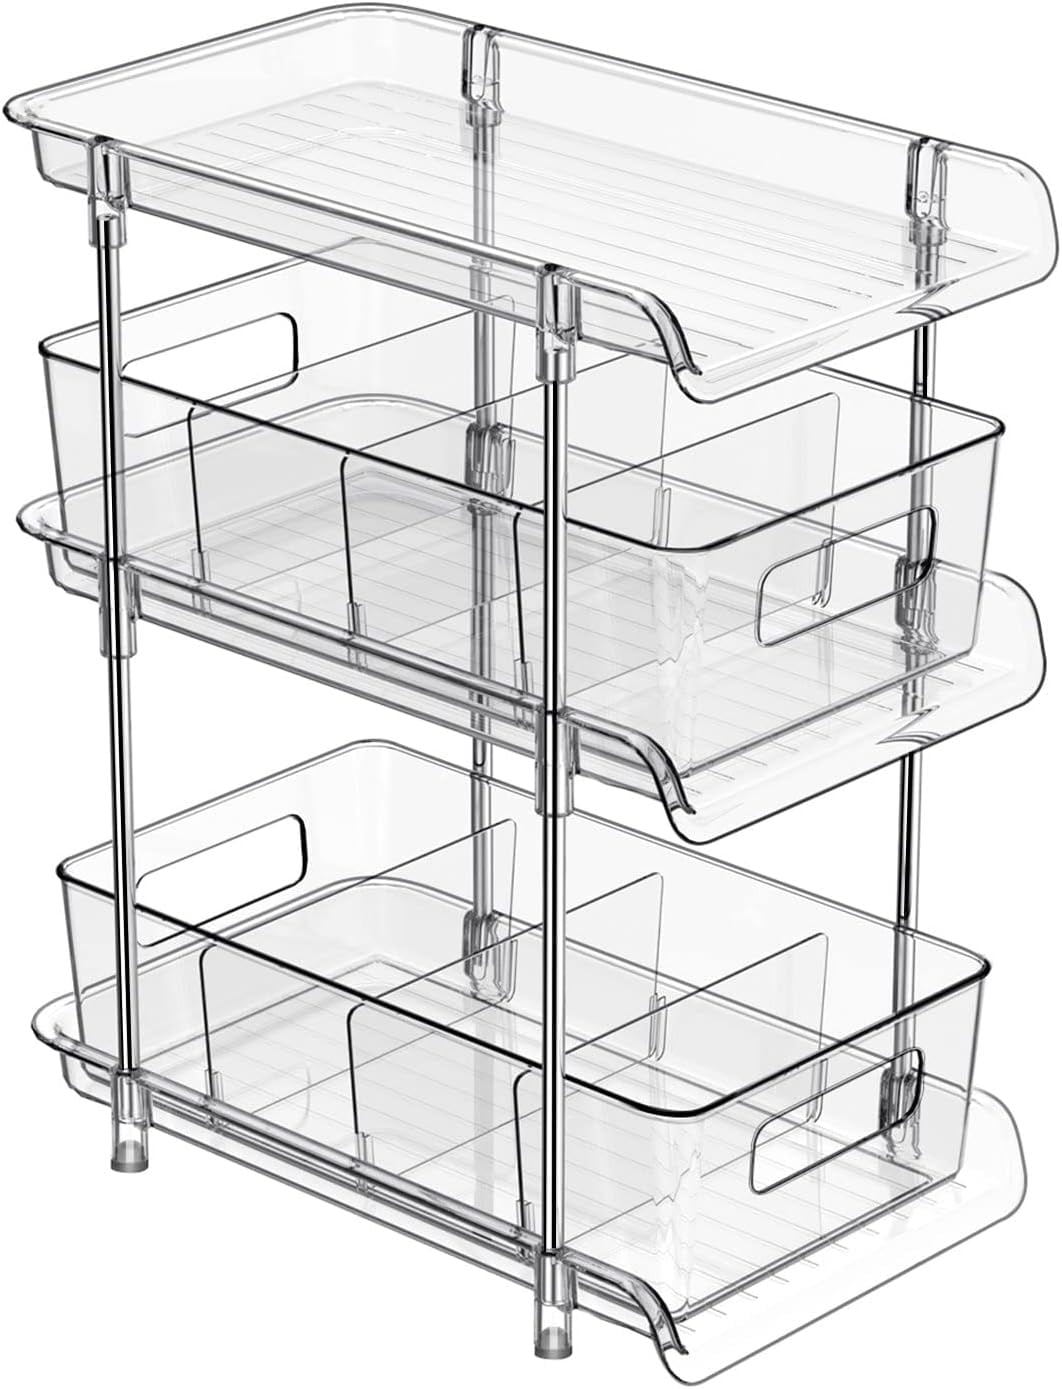  Under Sink Organizer with Wheels，Bathroom and Kitchen Cabinet  Organizer with Dividers,Clear Plastic Storage Organizer Bins Suitable for  Medicine Cabinet,Vanity, Refrigerator, Office (2 Clear tray)